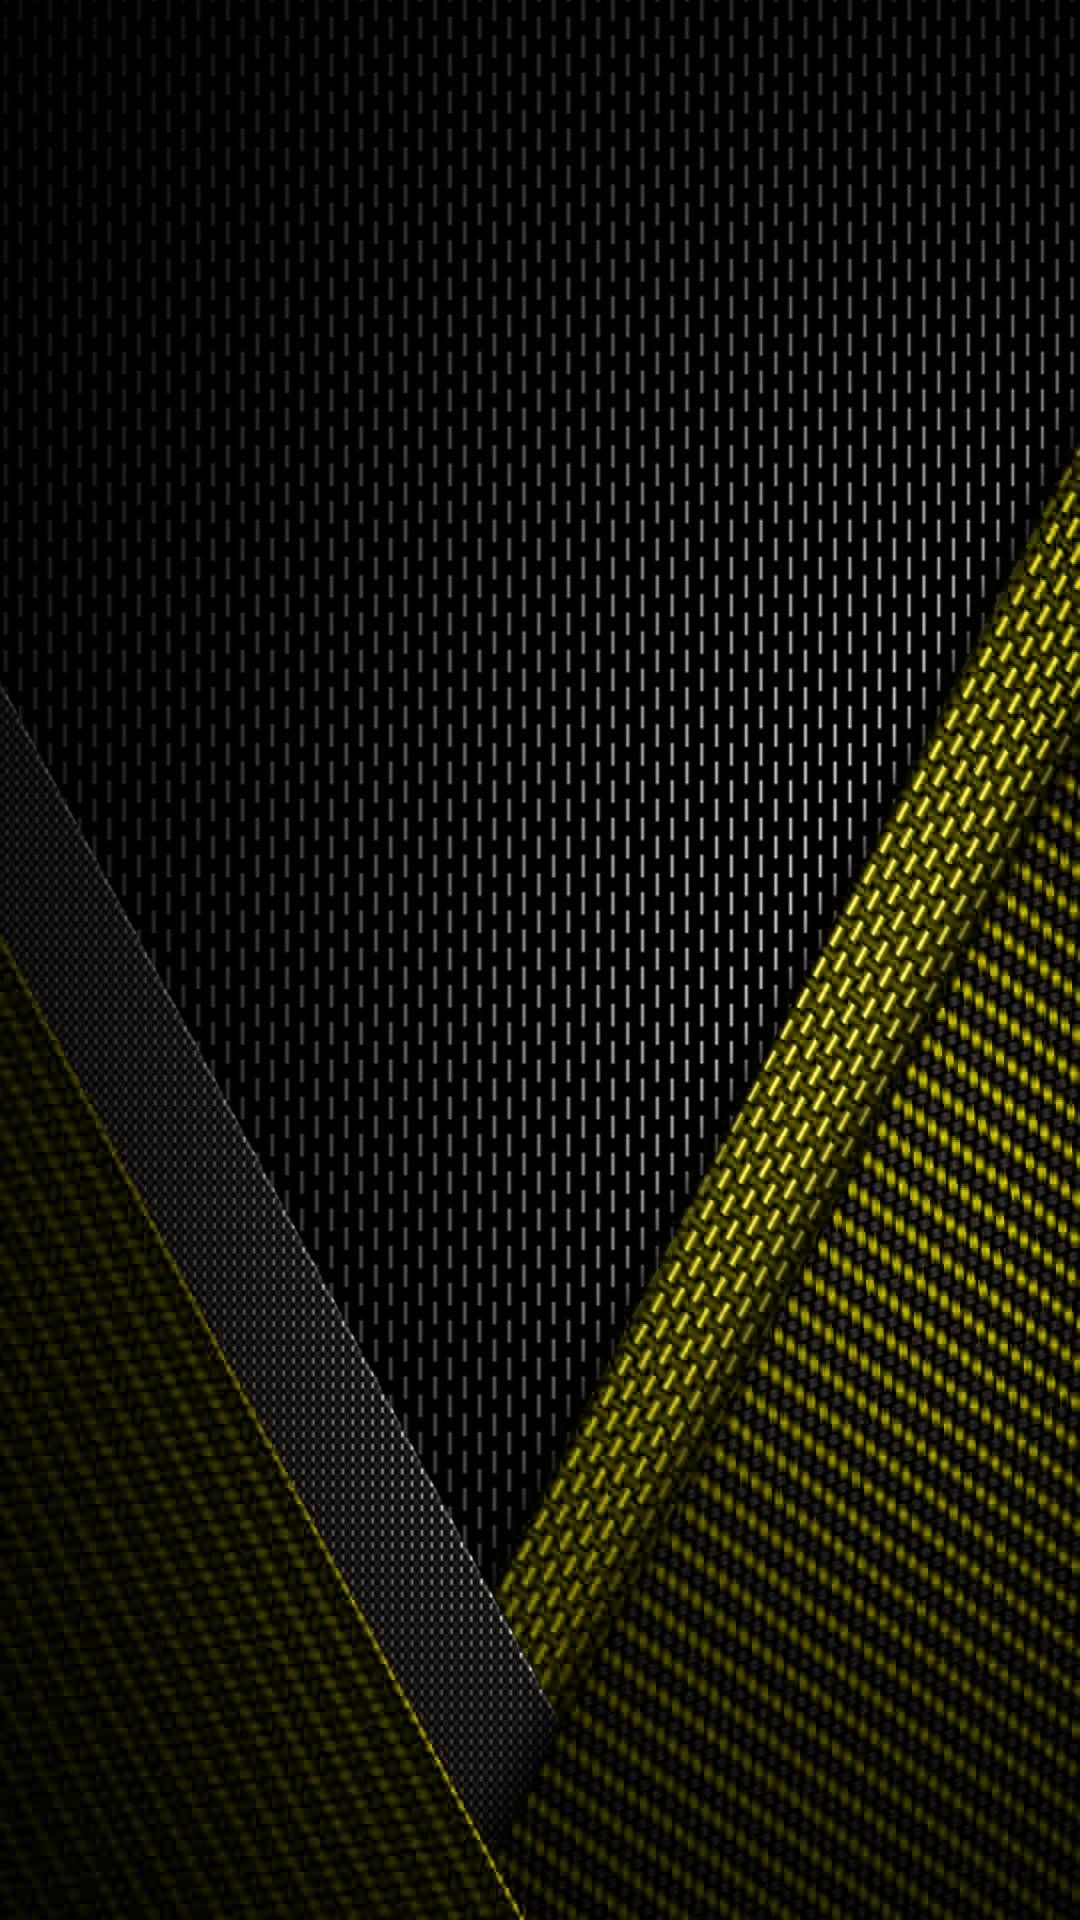 Black And Yellow Textured Wallpaper Abstract Geometric